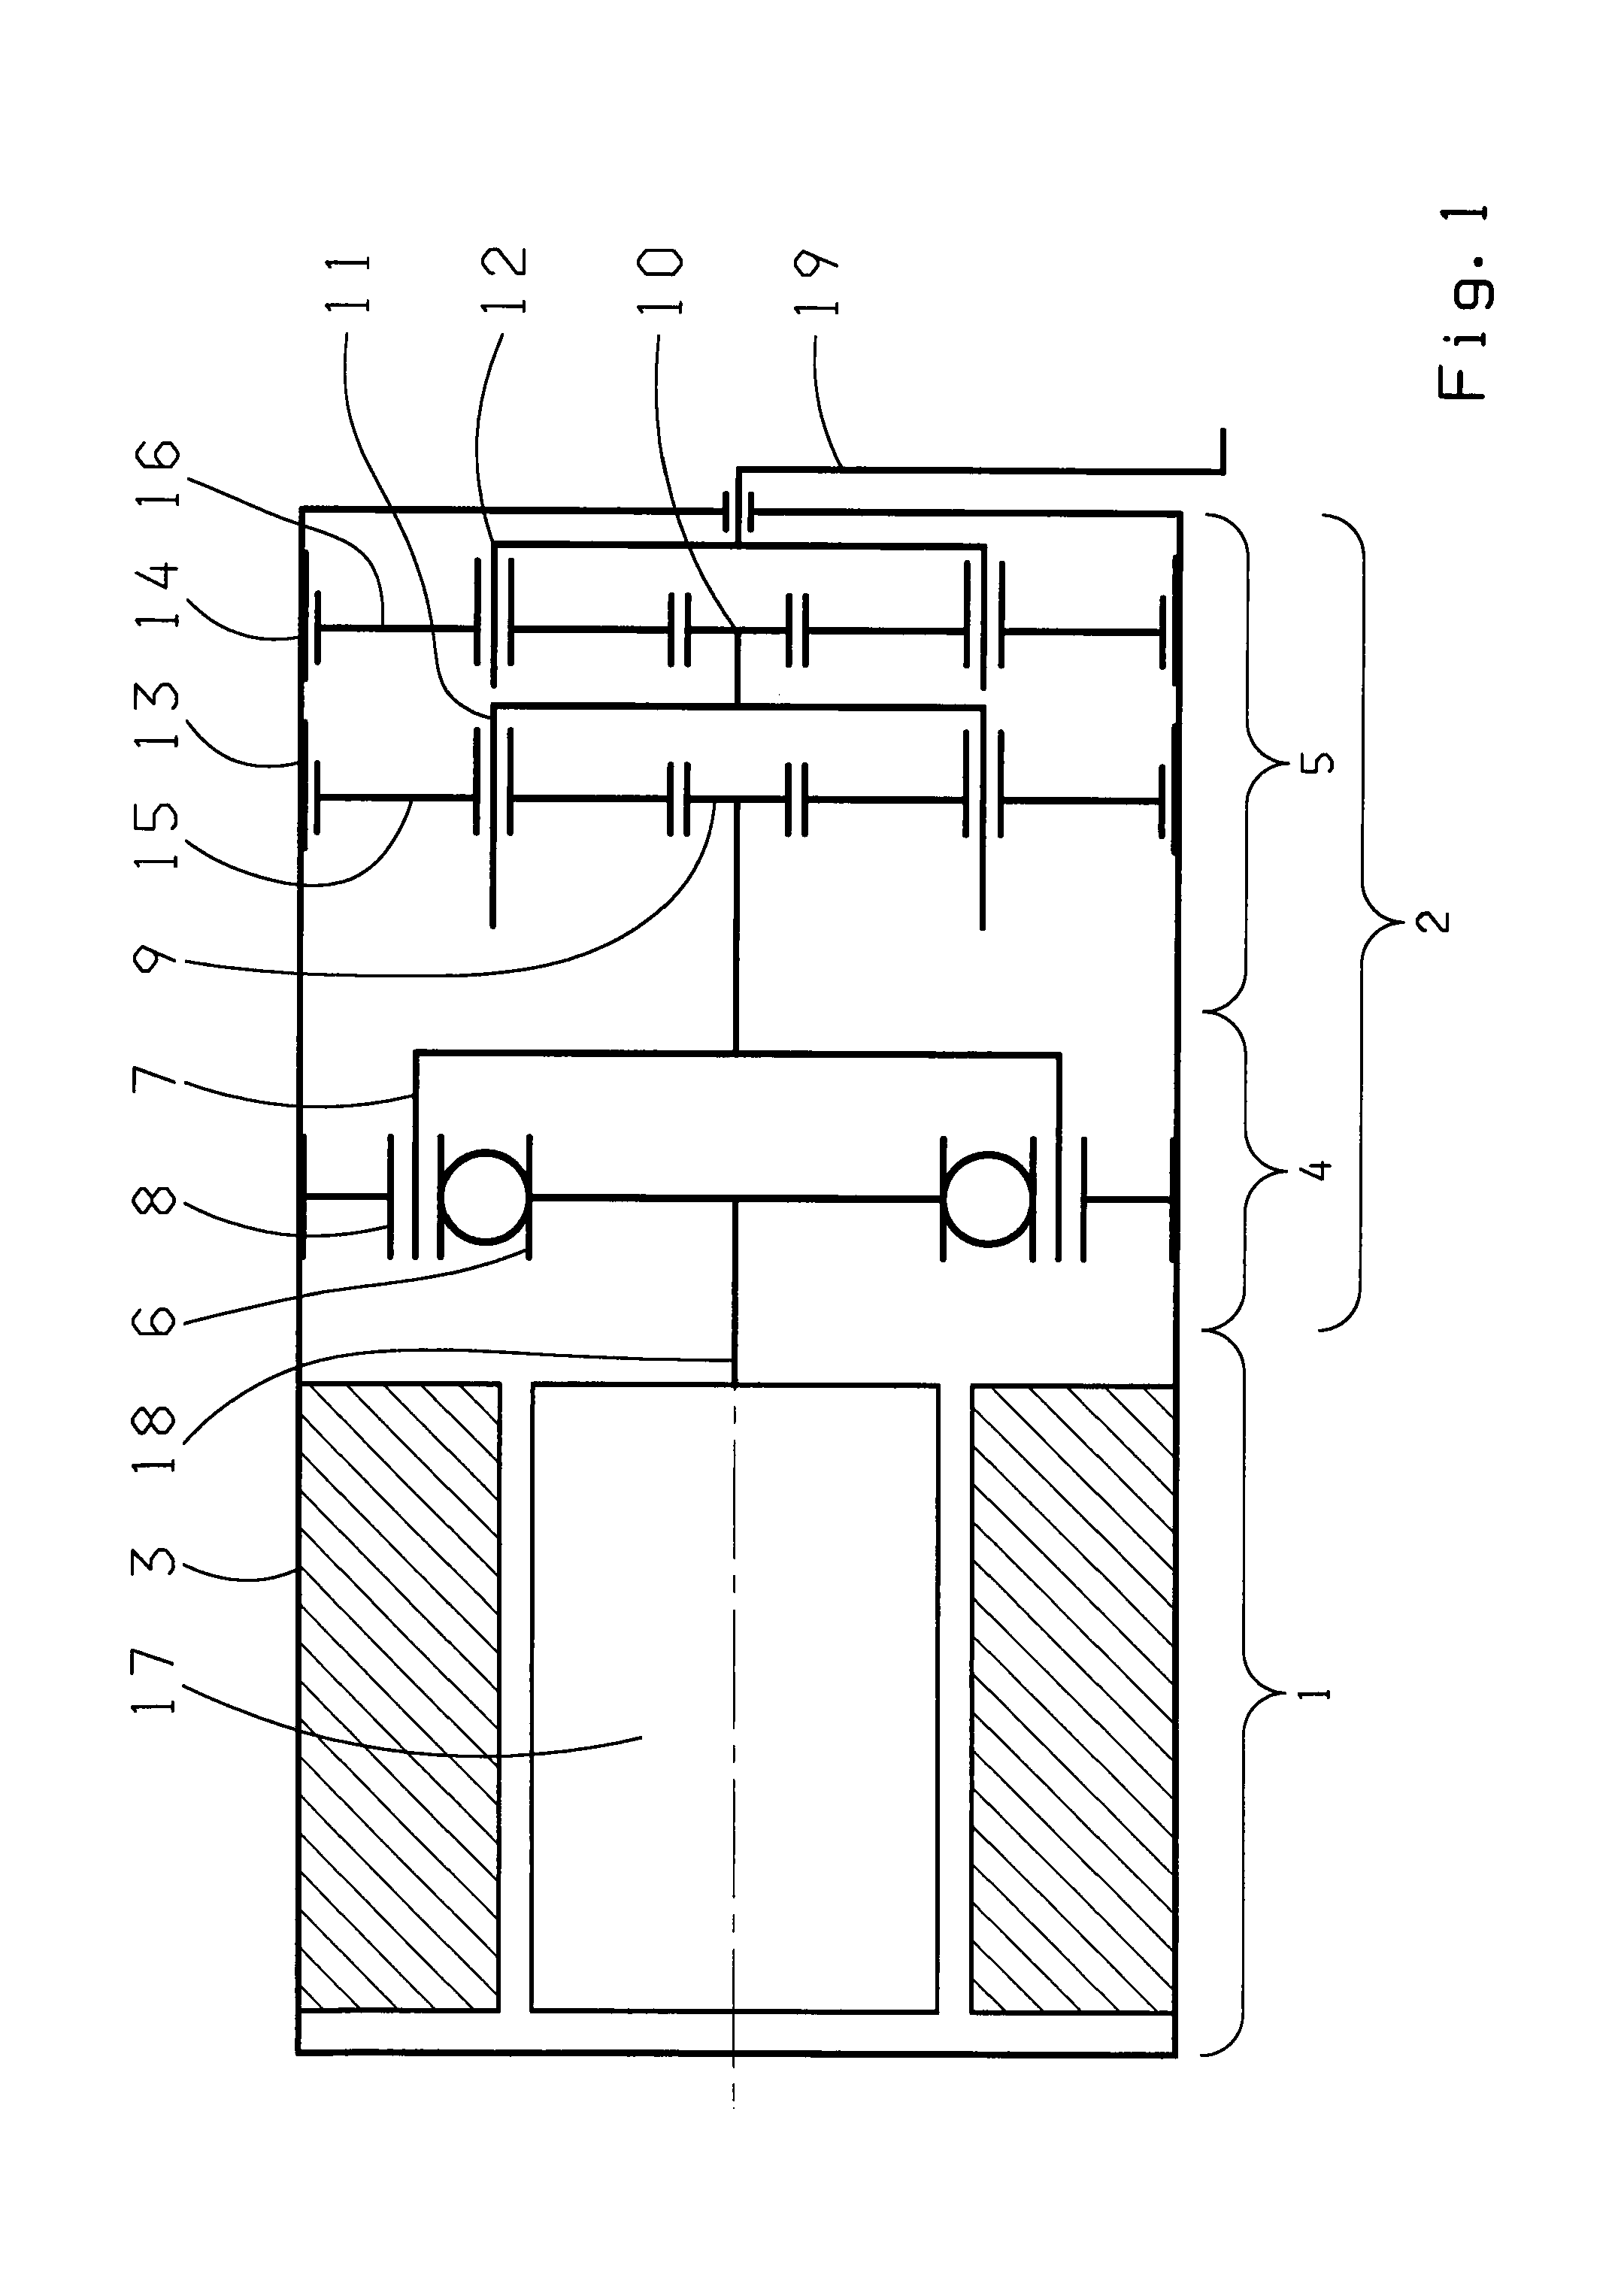 Actuator for generating a rotational positioning movement